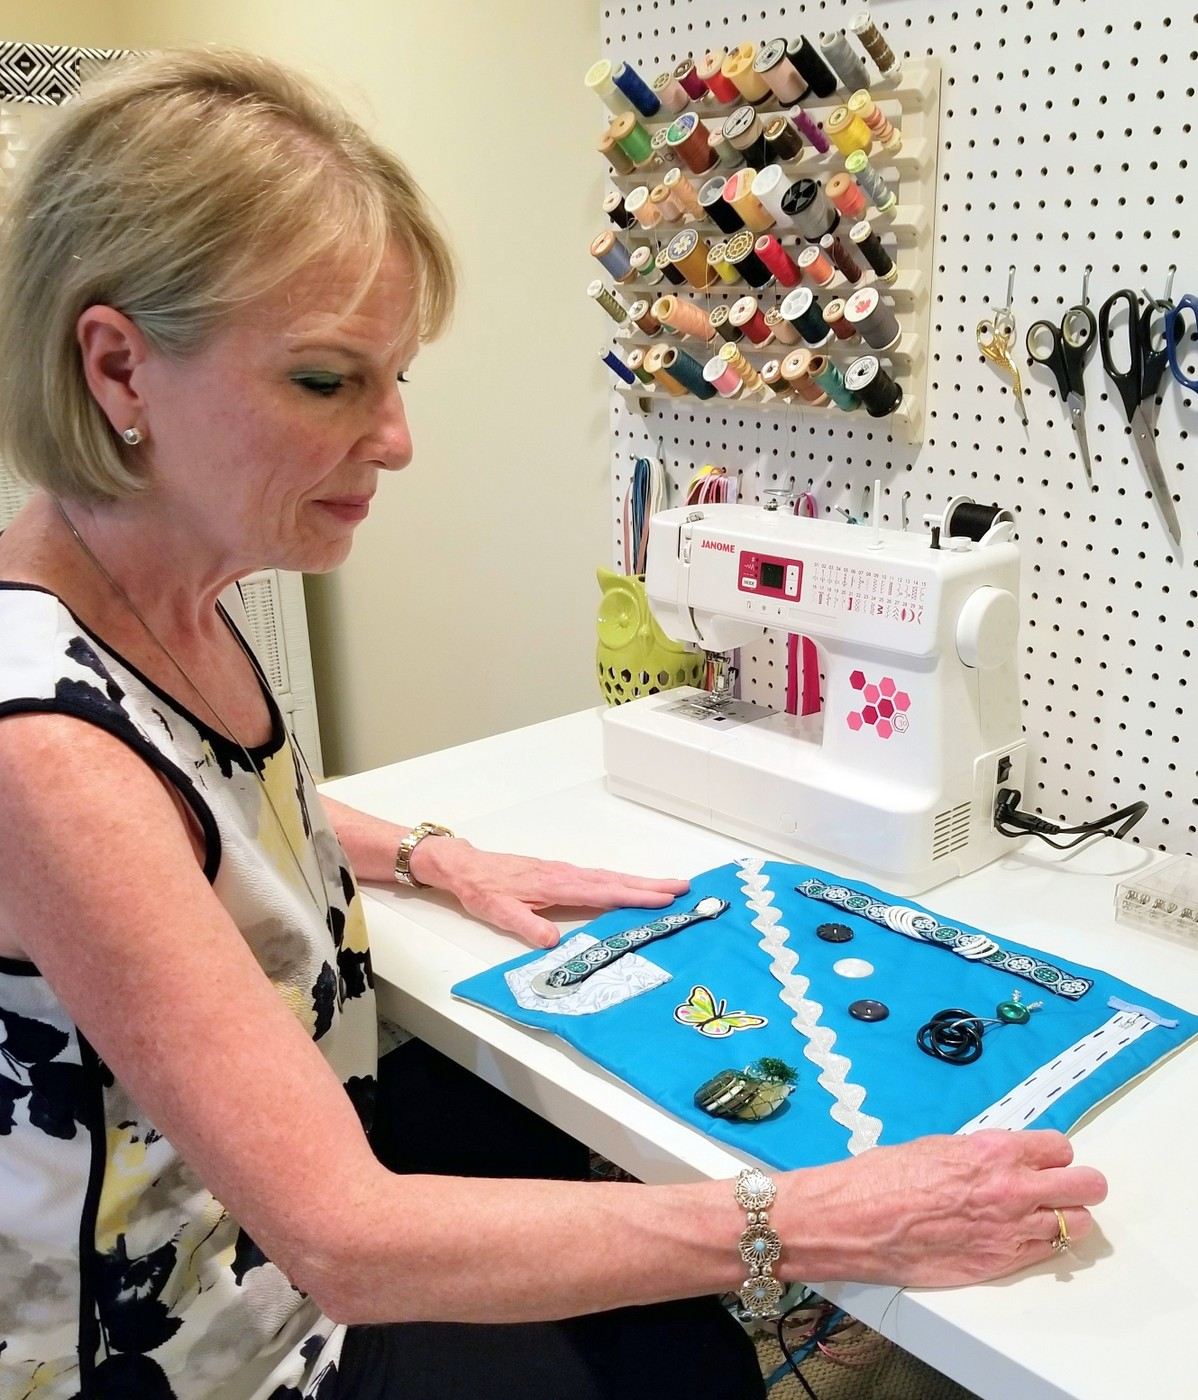 Area residents asked to help with supplies, as fidget blanket project continues to grow